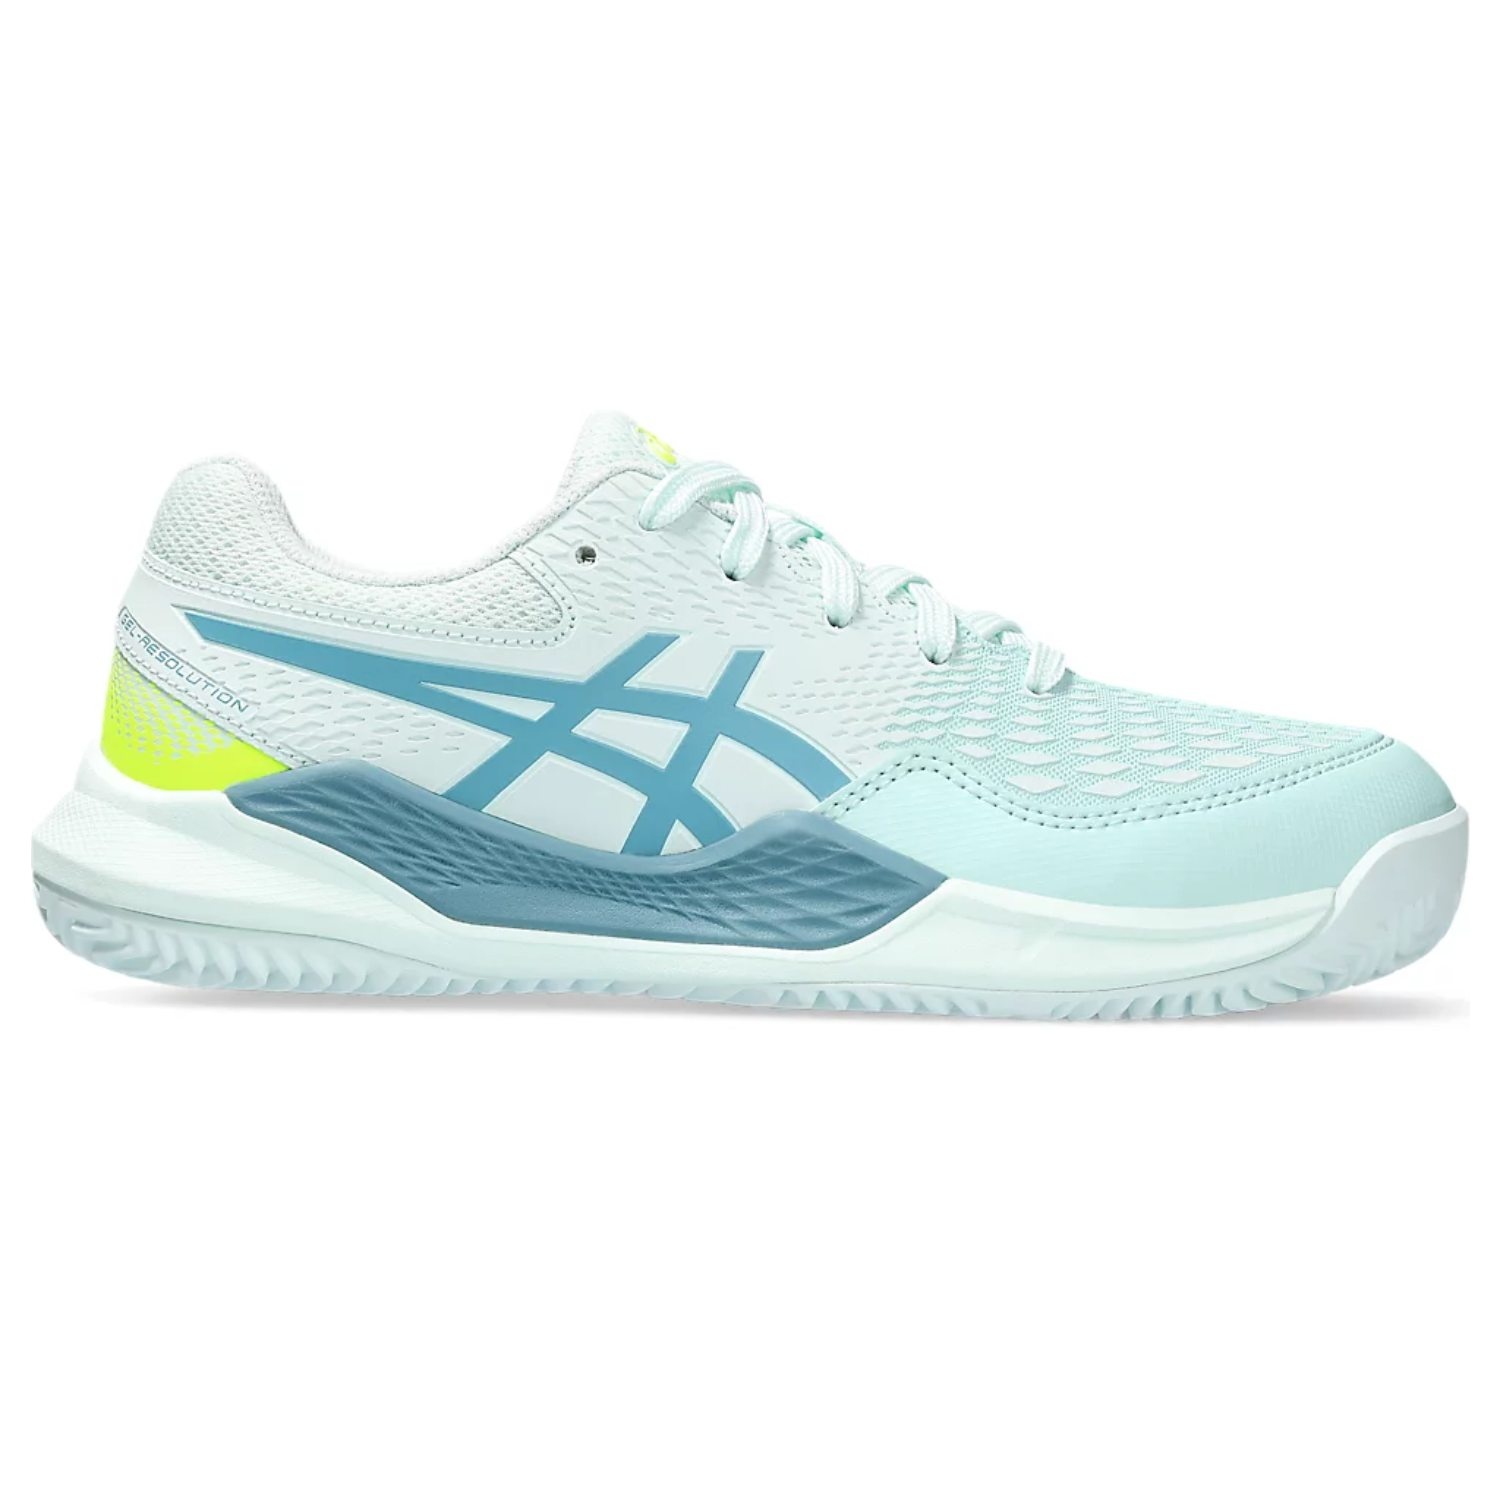 Asics Gel Resolution 9 GS Clay Soothing Sea/Gris Blue